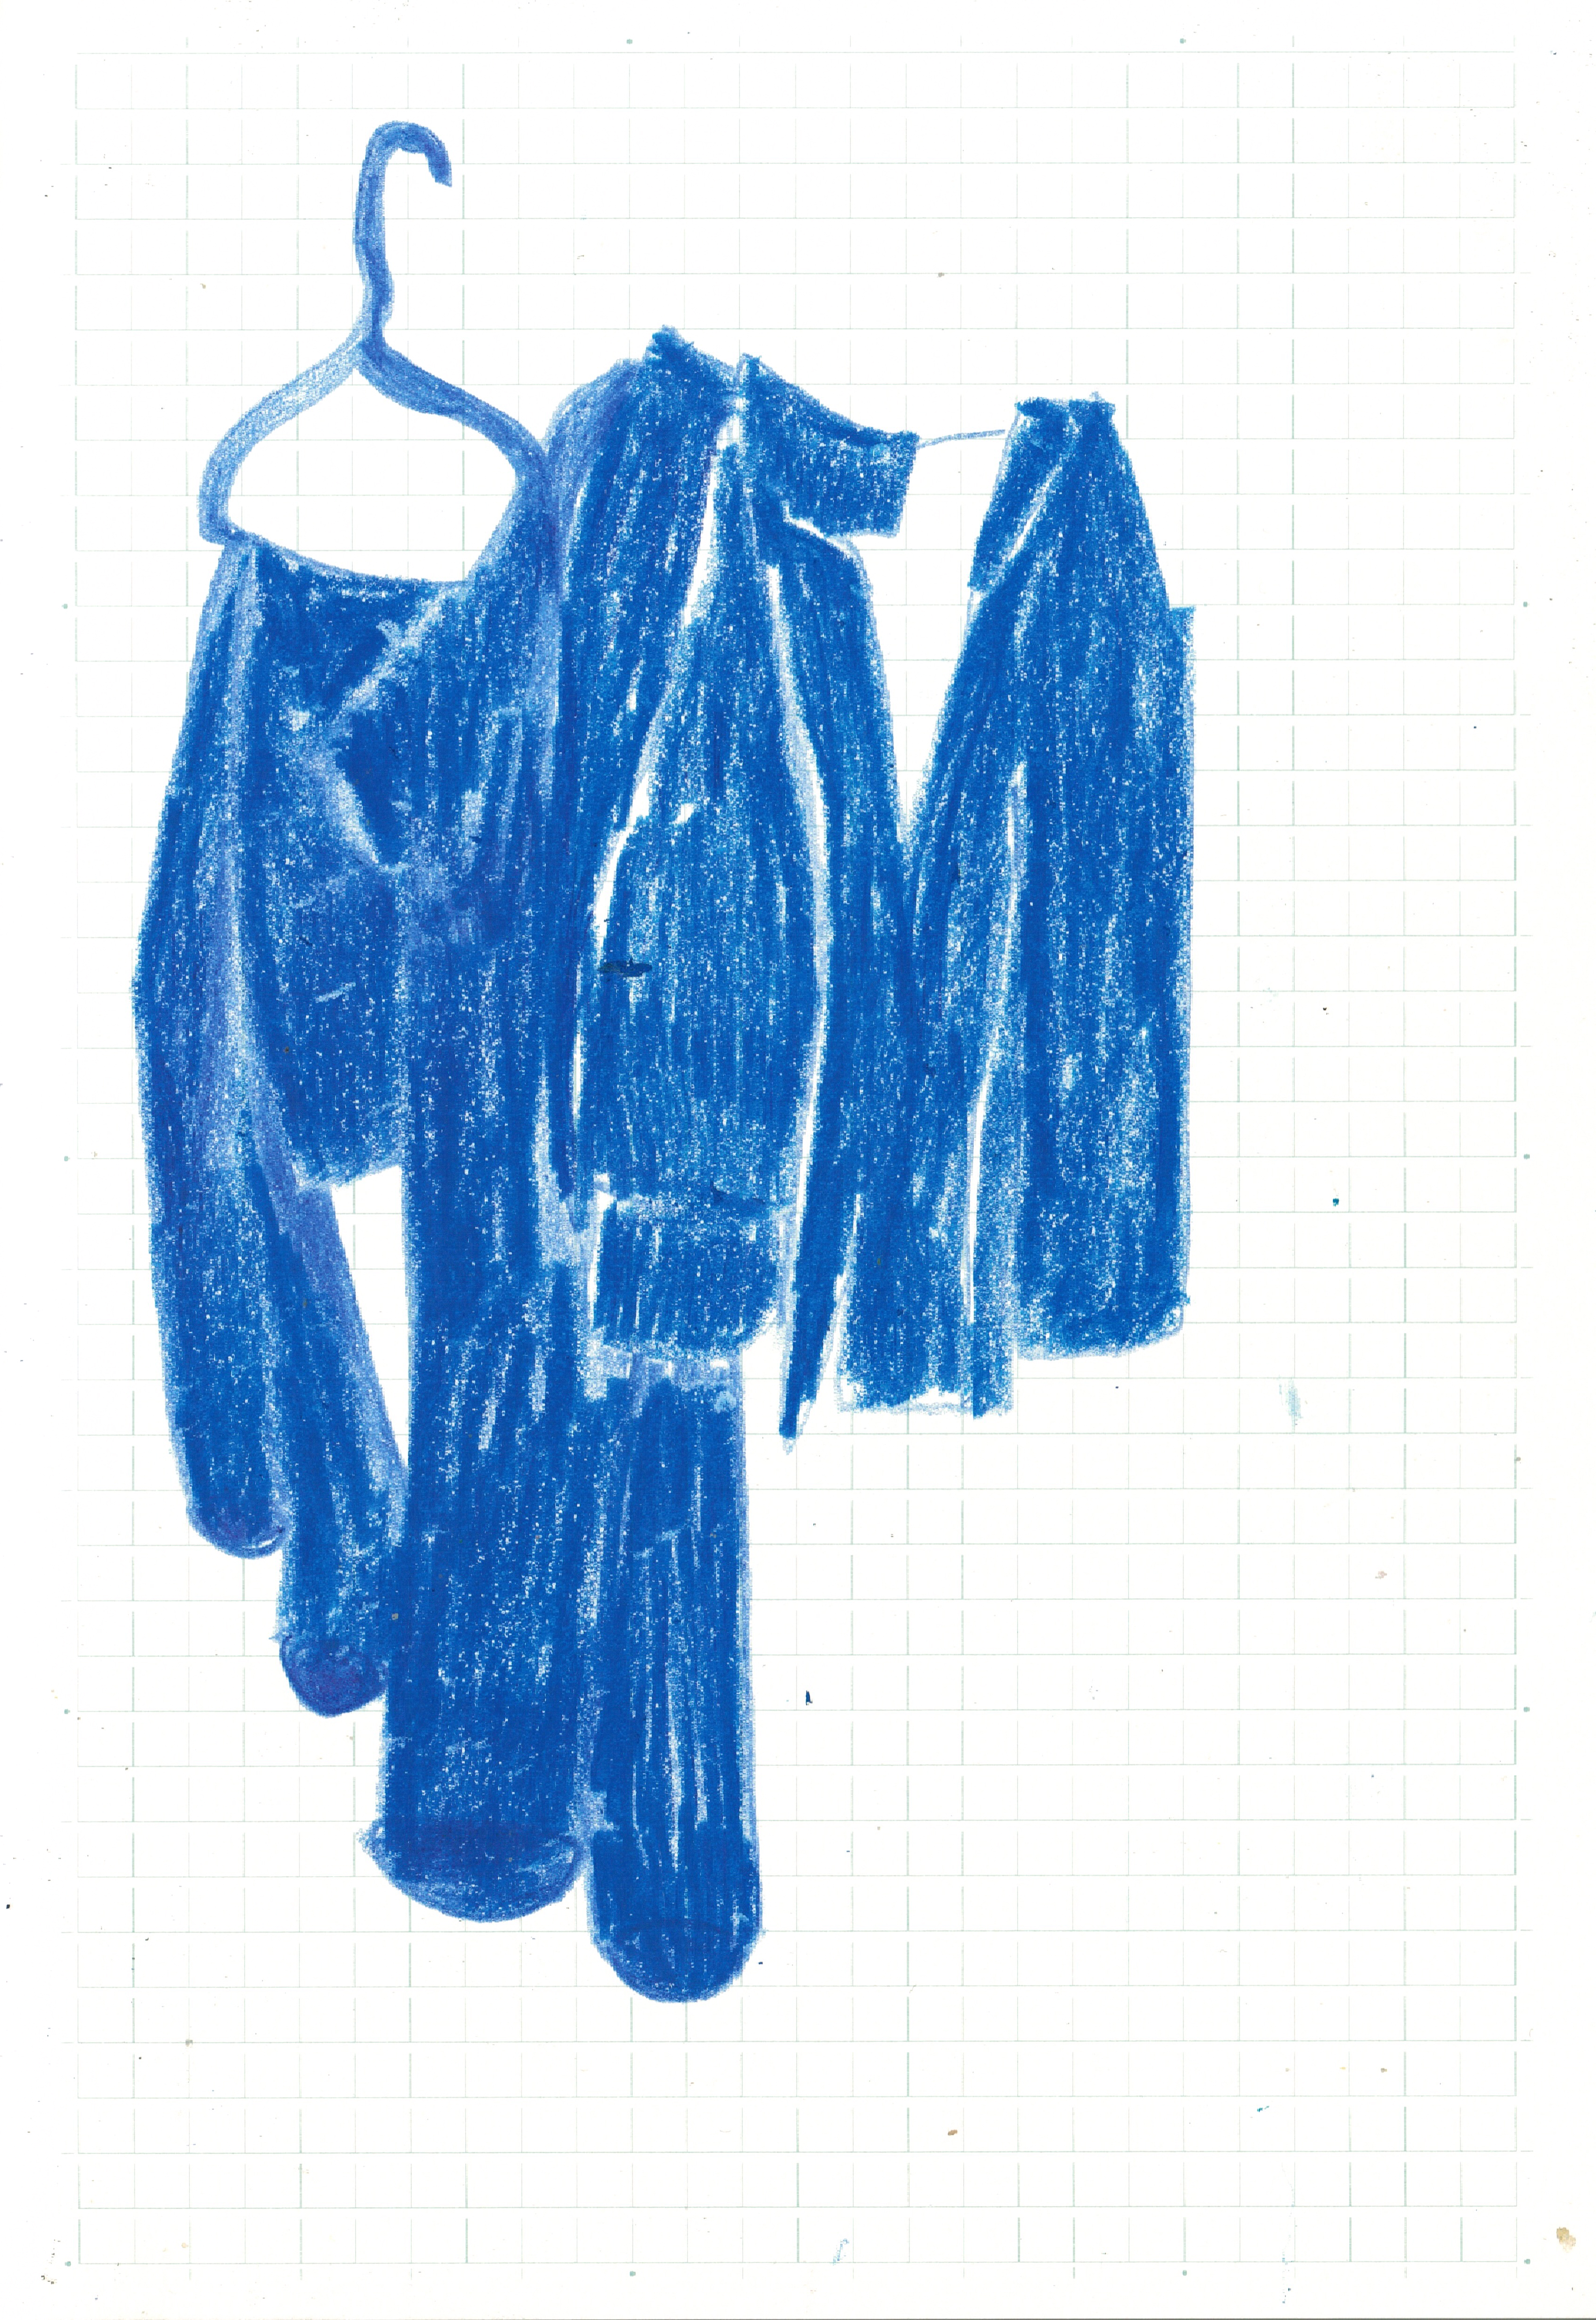 drawing with blue colored pencils of hanging clothes and a clotheshanger